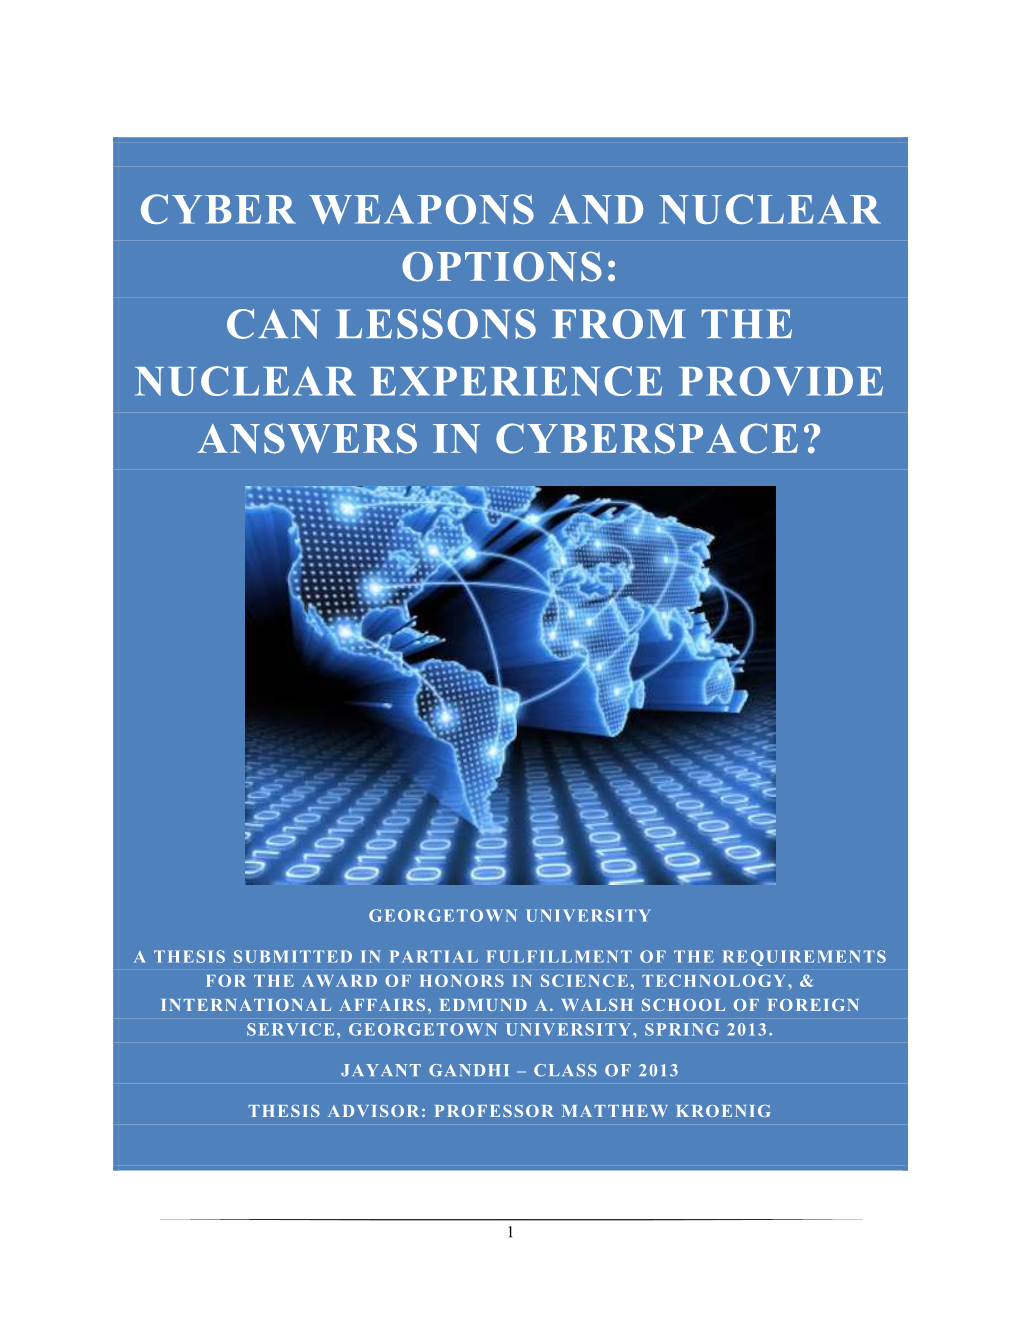 Can Lessons from the Nuclear Experience Provide Answers in Cyberspace?